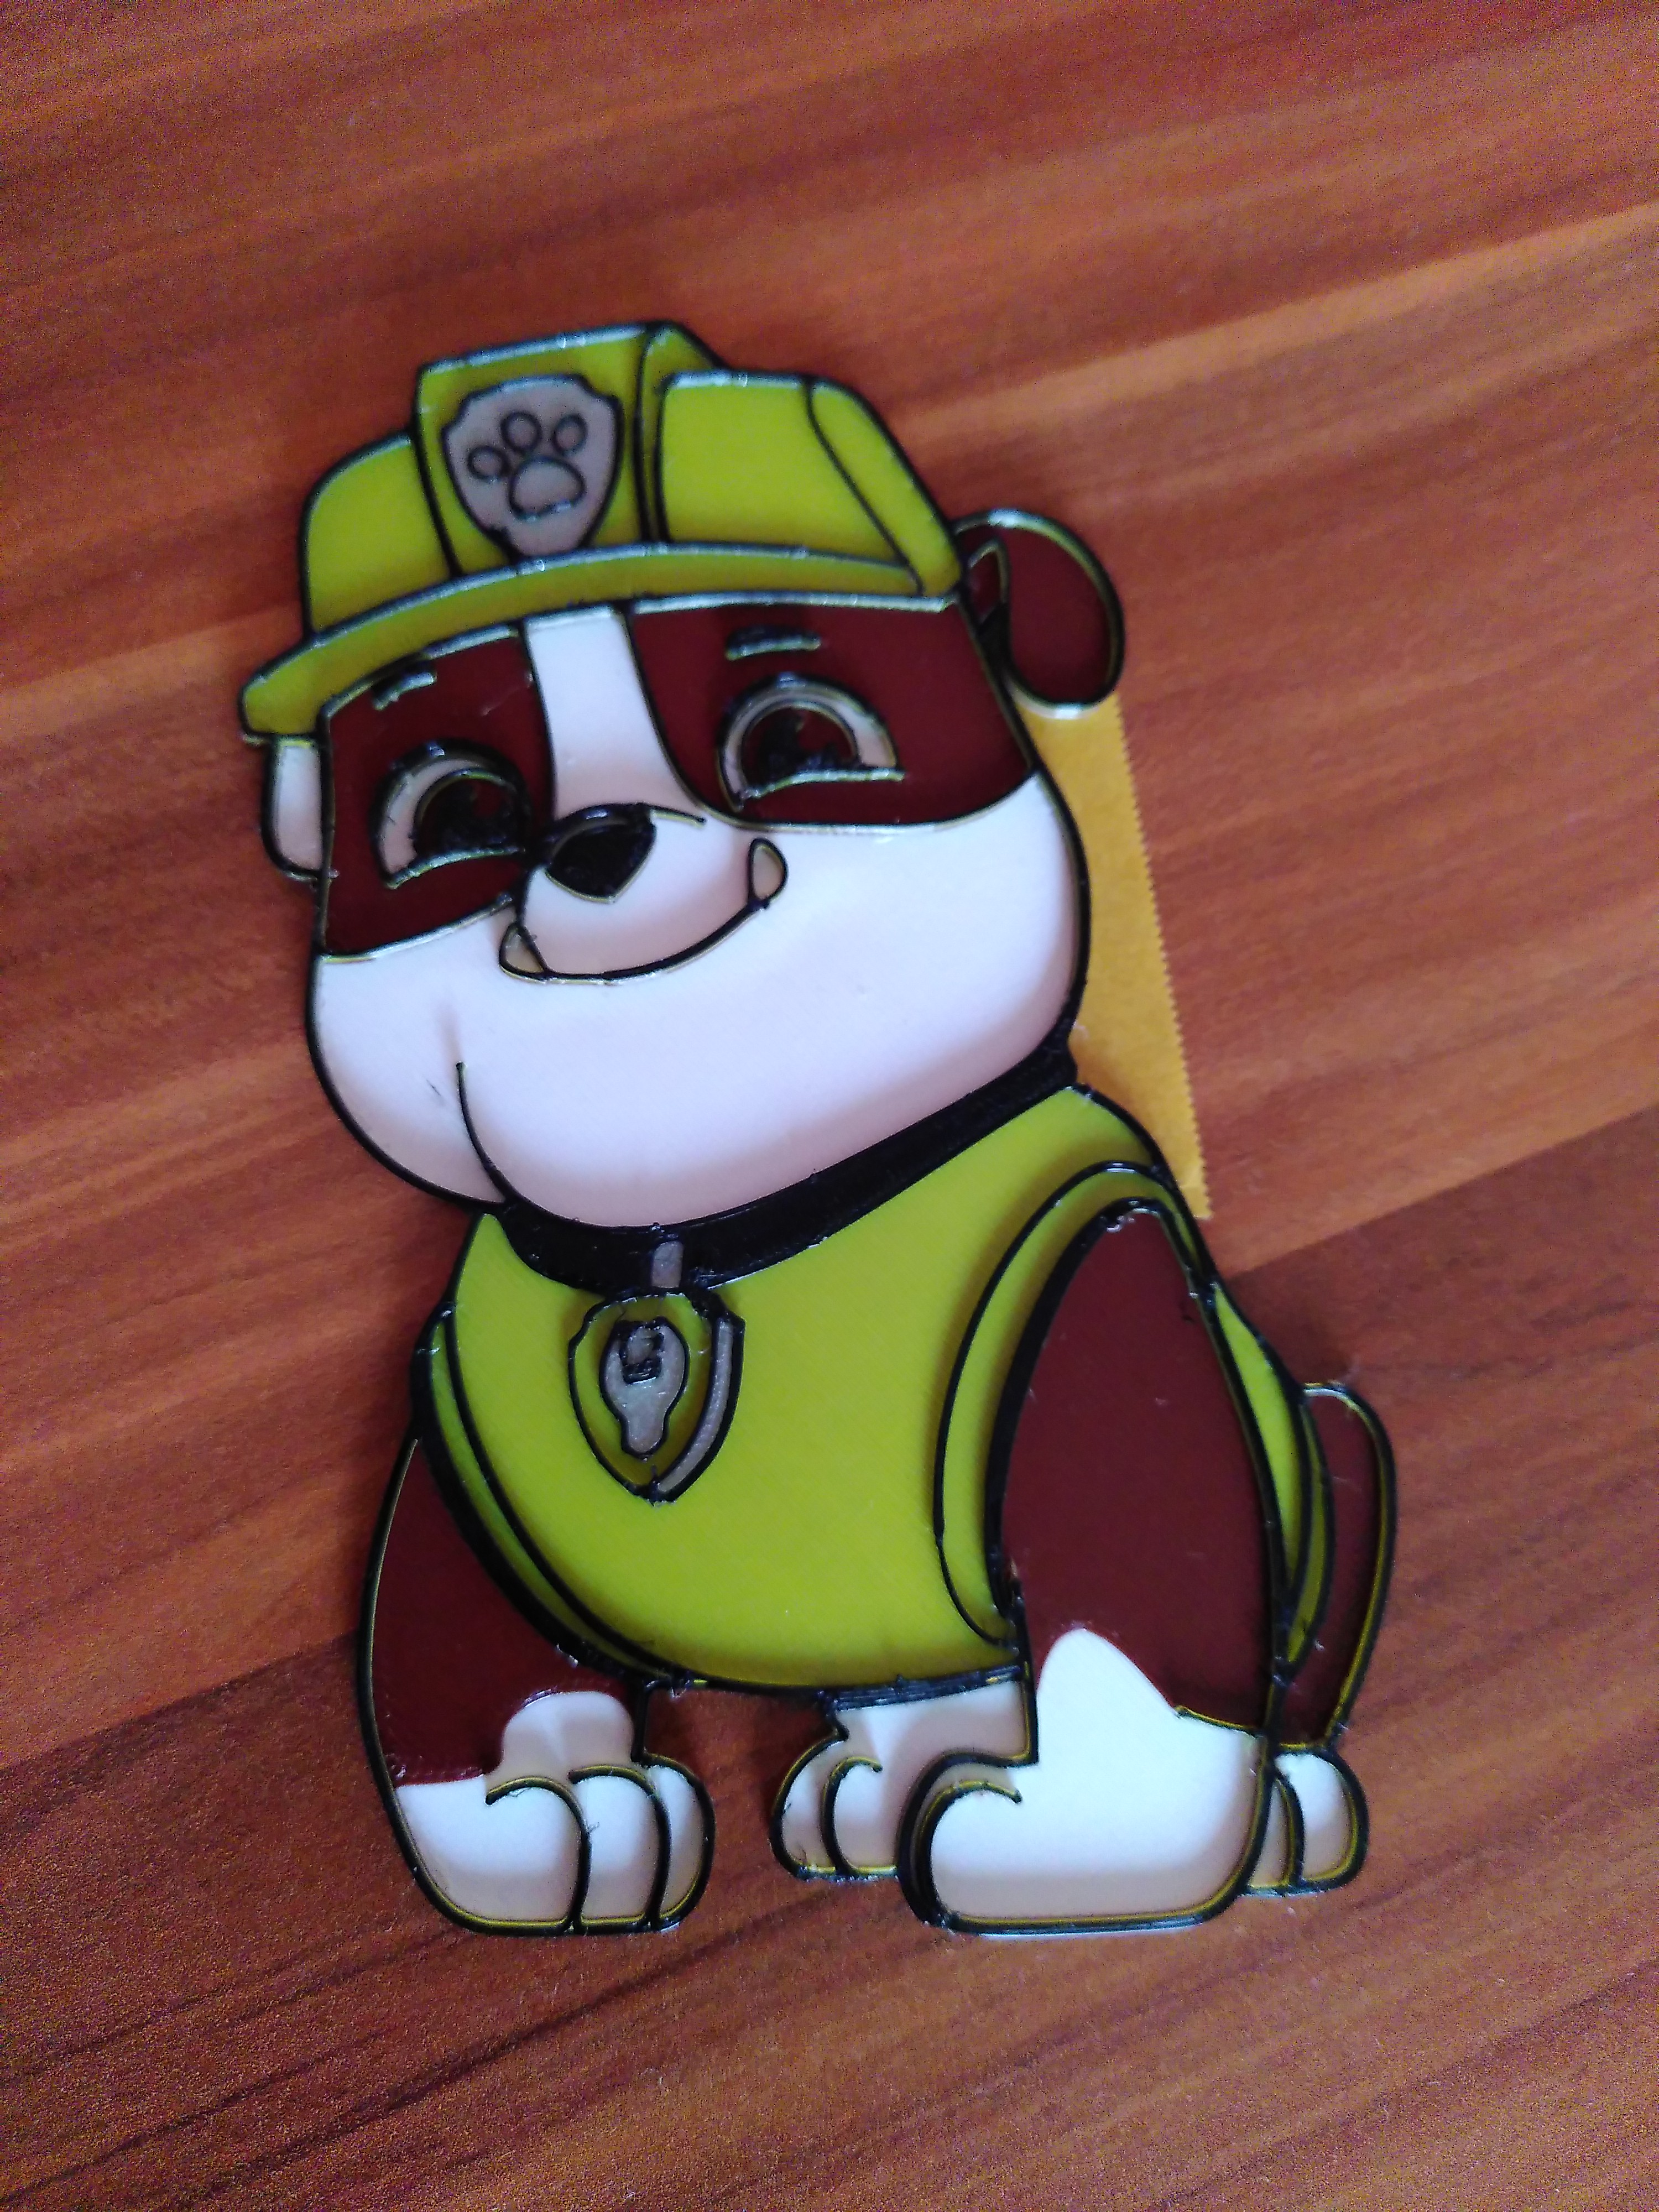 Rubble from Paw Patrol